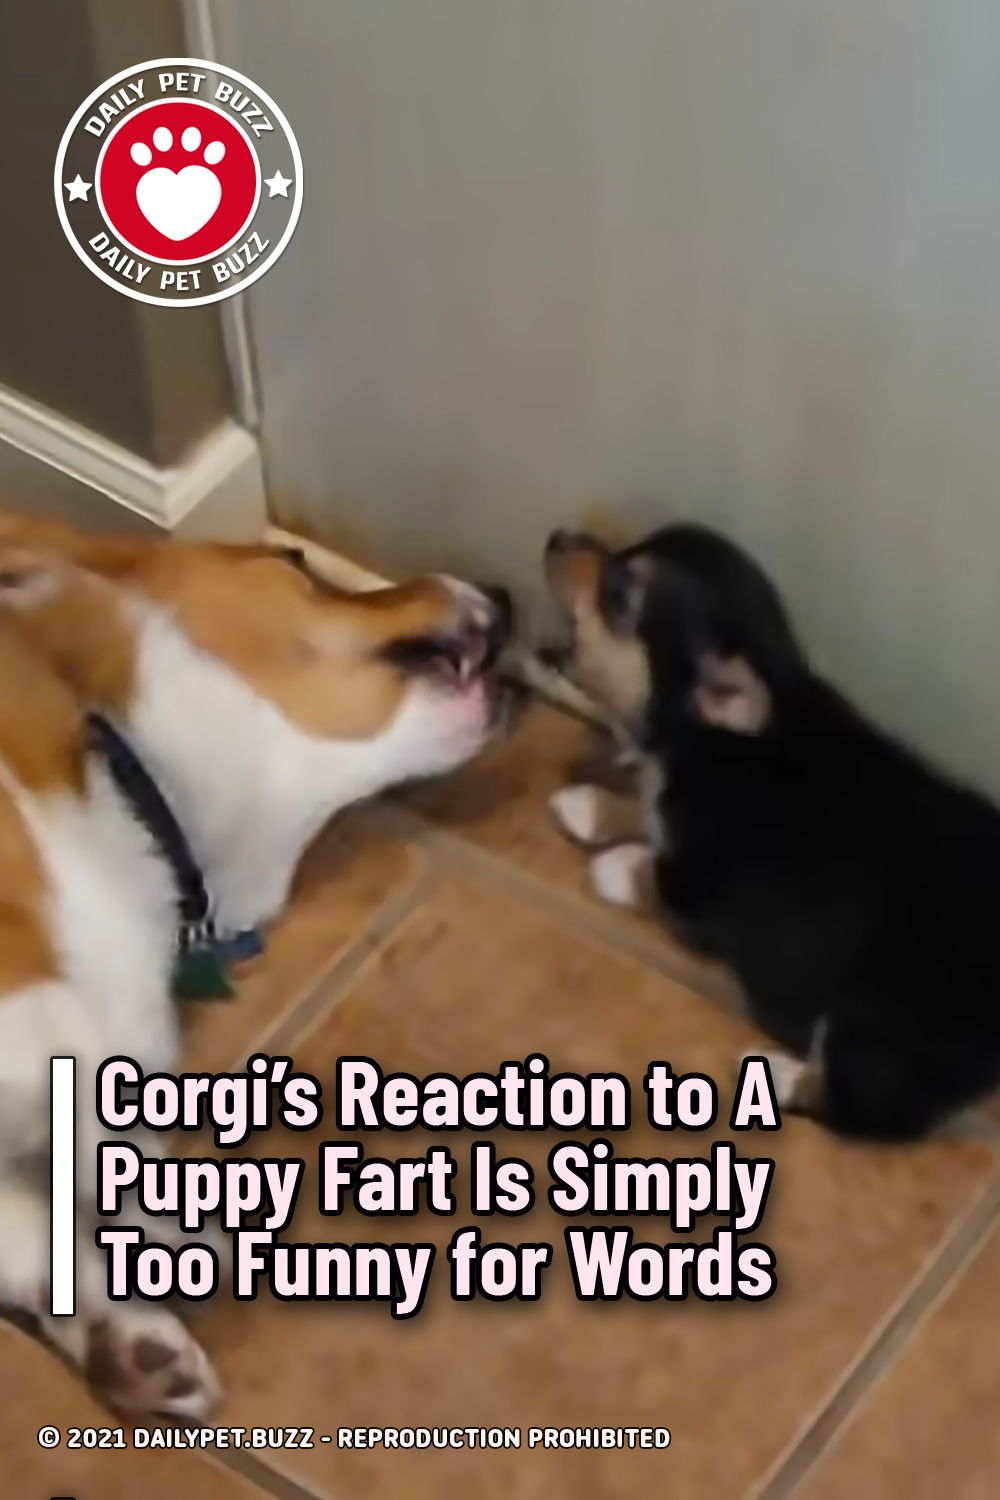 Corgi’s Reaction to A Puppy Fart Is Simply Too Funny for Words